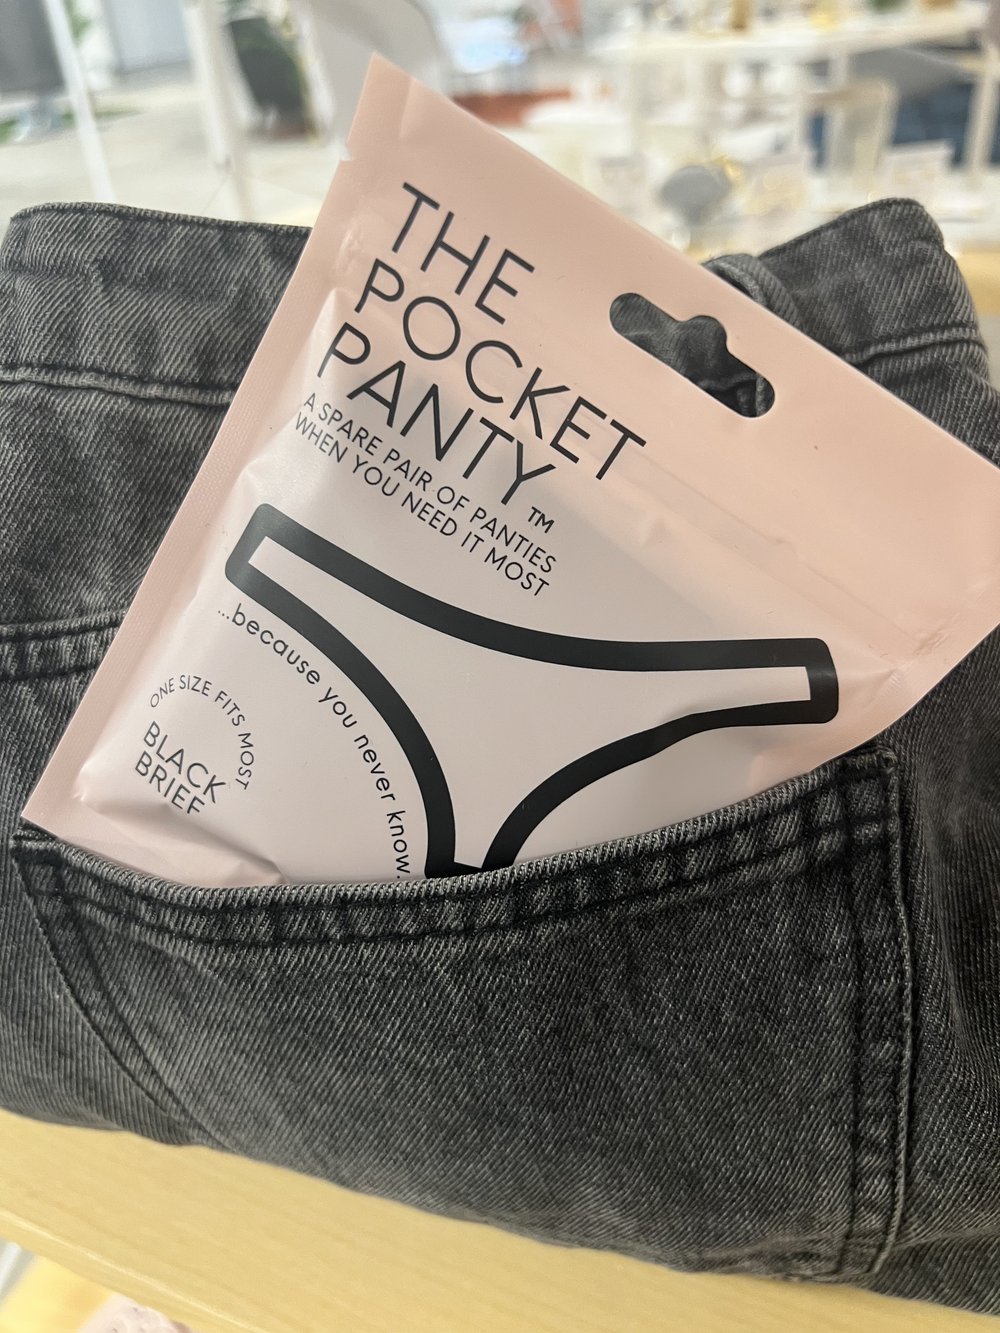 The Pocket Panty wholesale products